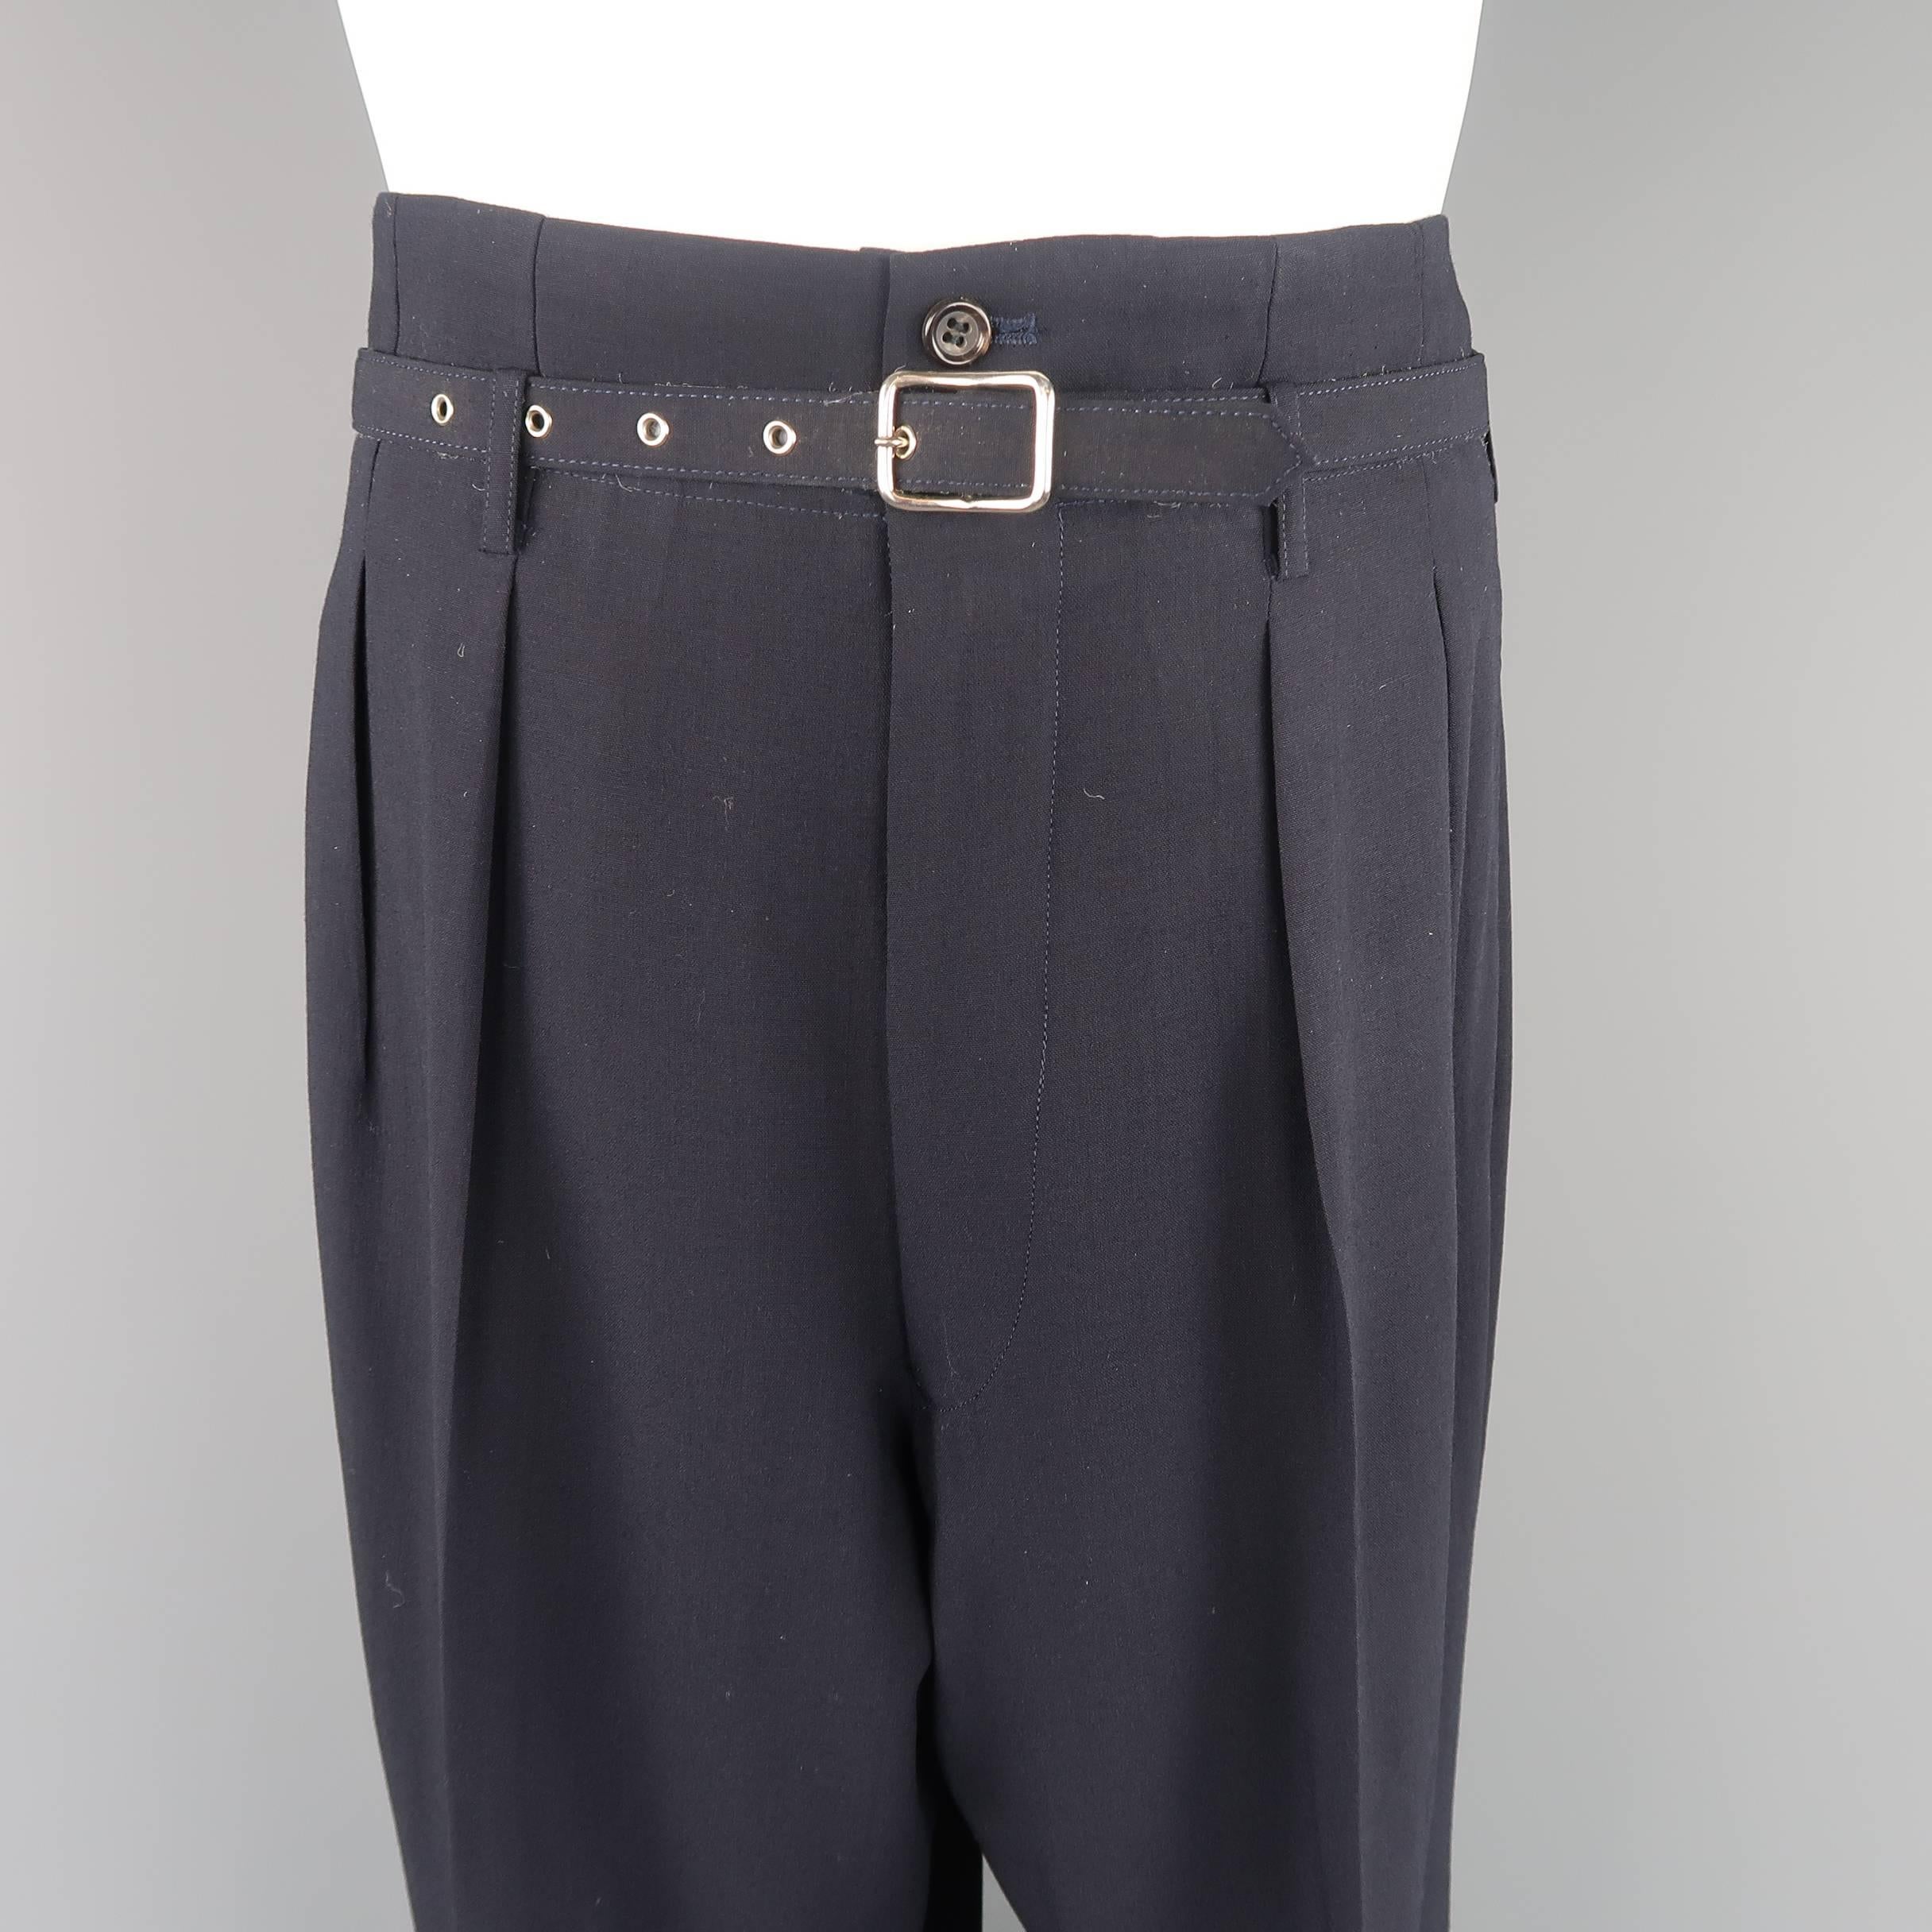 COMME des GARCONS HOMME PLUS dress pants come in navy blue wool with a high rise, pleated front, wide tapered leg, cuffed hem, and matching fabric waist belt. Belt liner cracking and worn out. Pants in excellent condition. As-is. Made in Japan.
